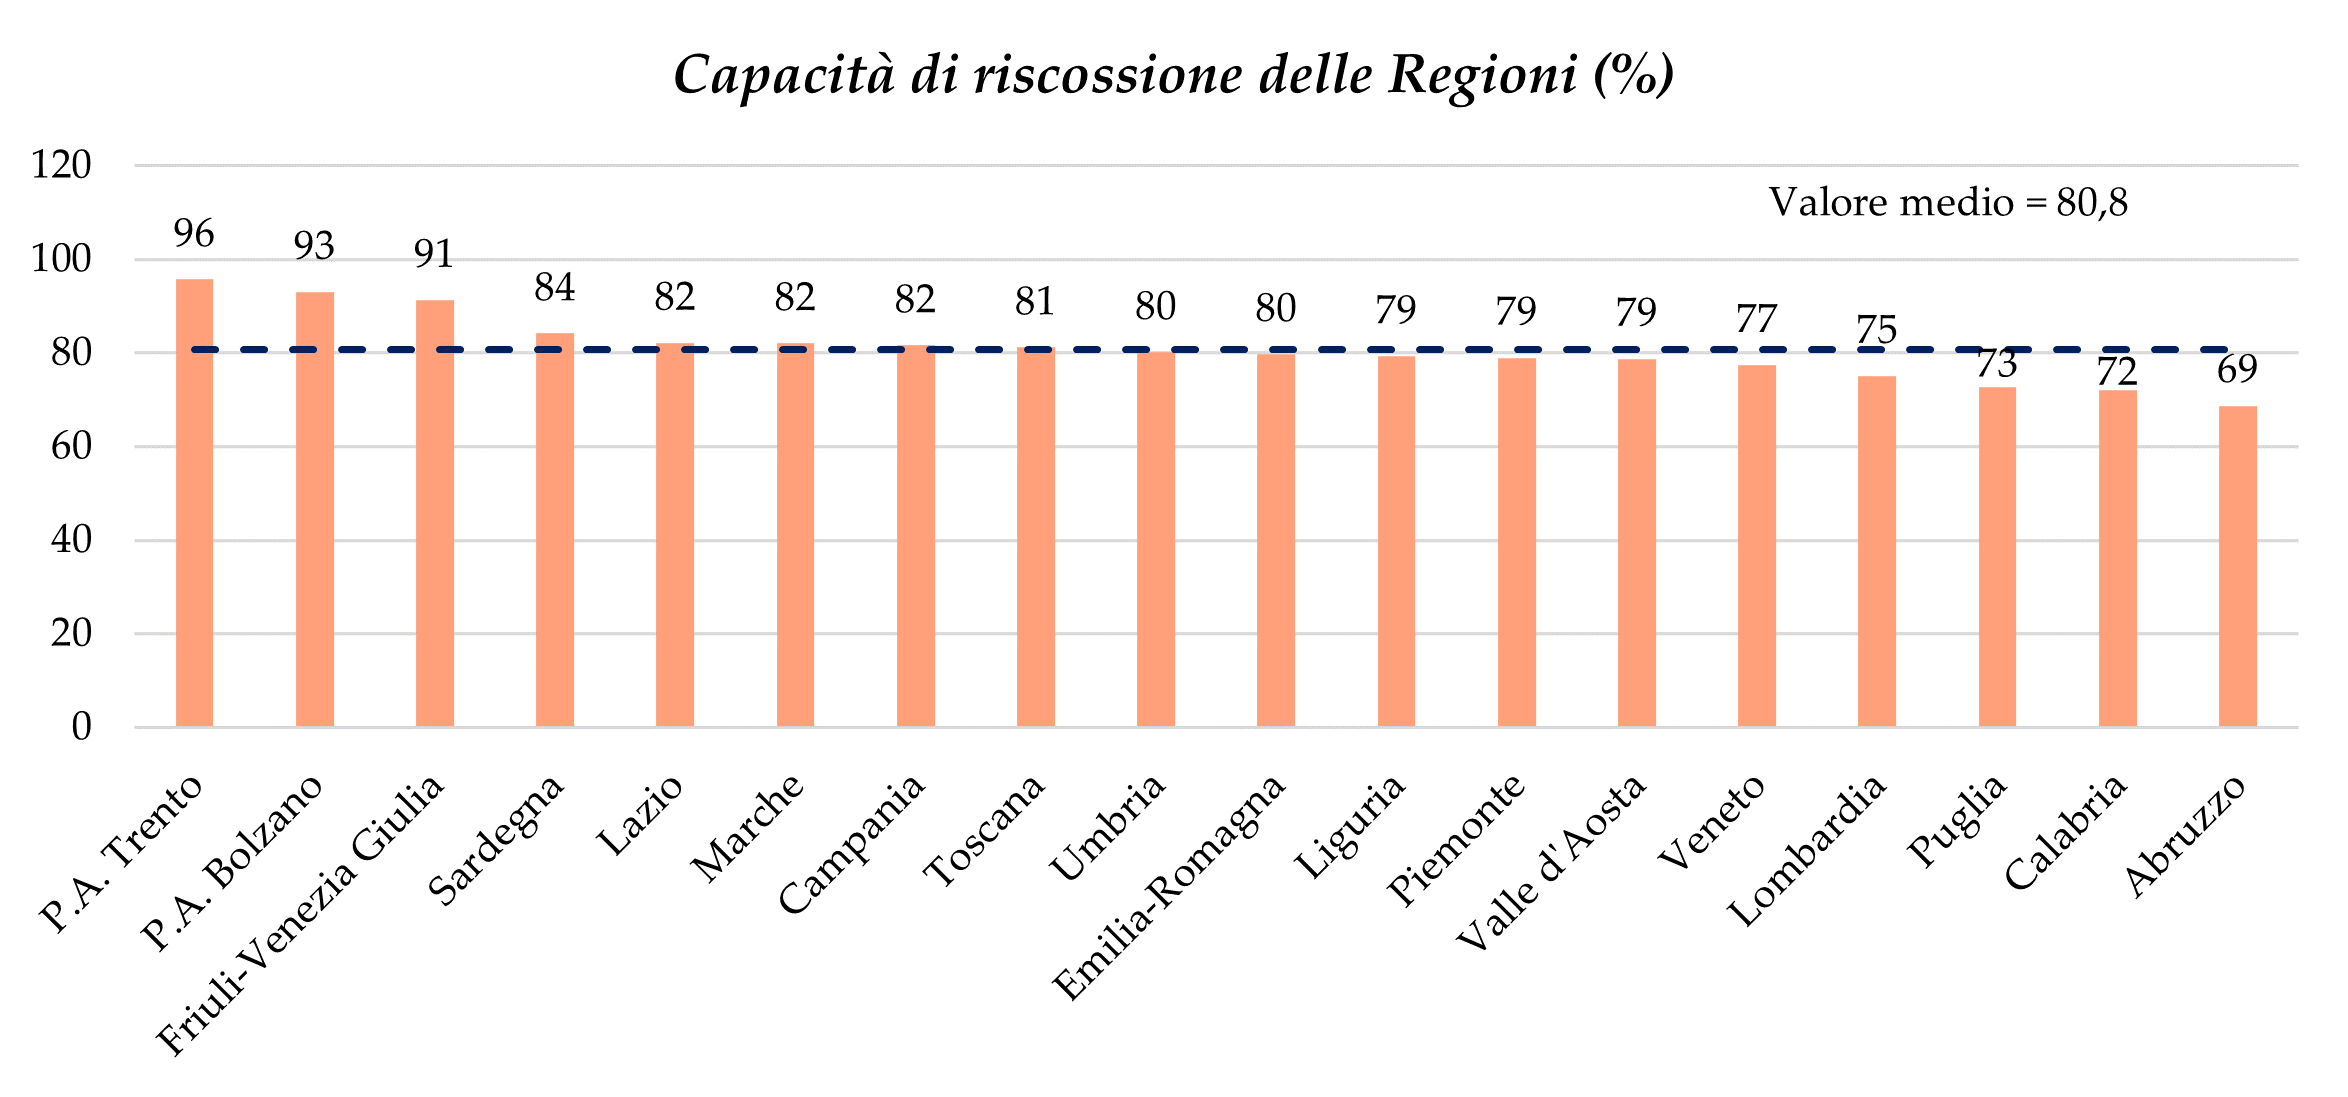 Collection capacity of the Regions